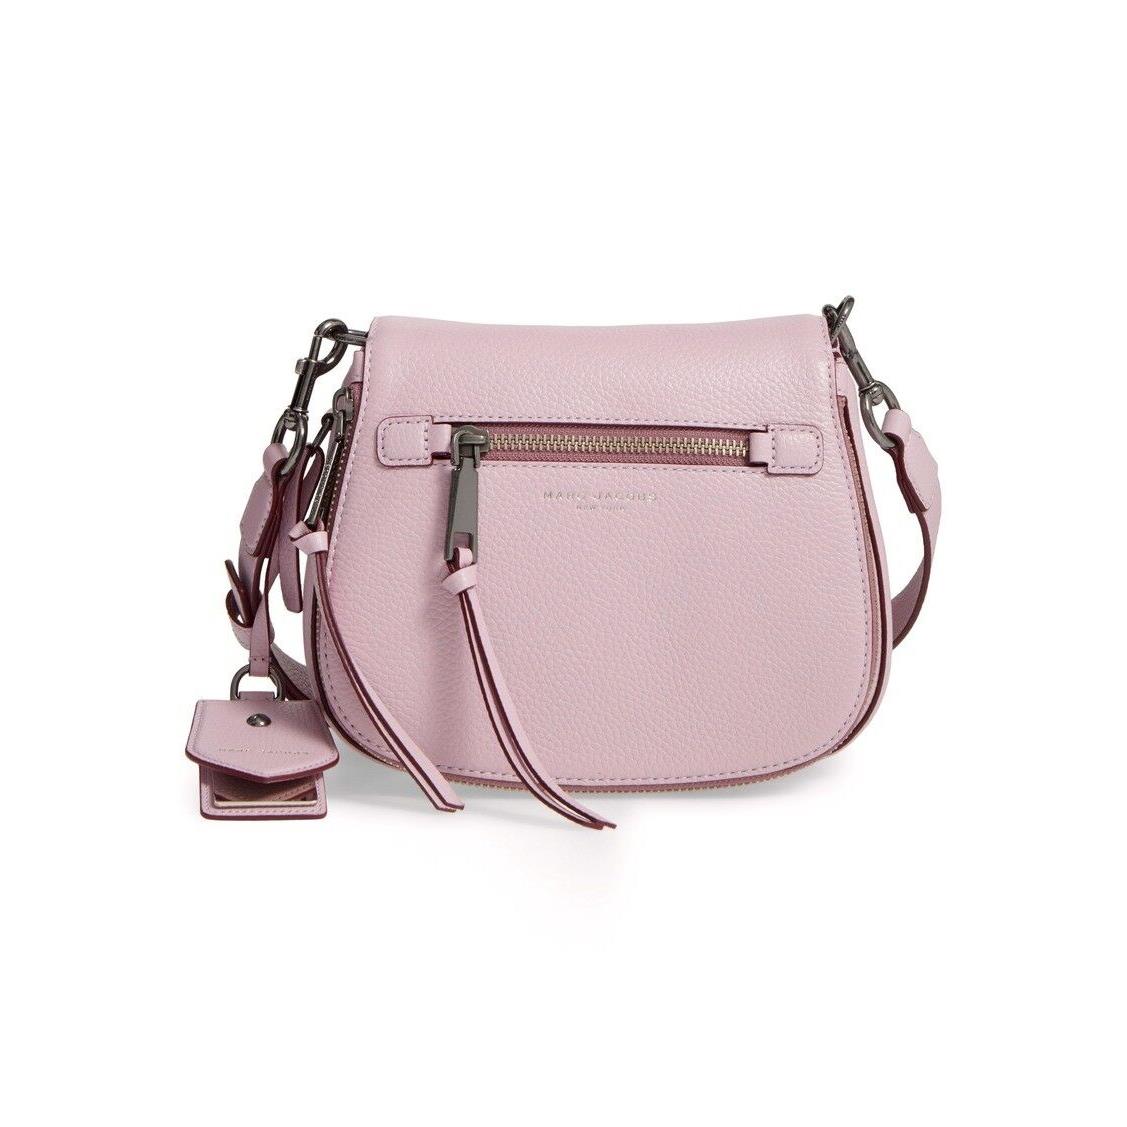 Marc Jacobs Small Recruit Nomad Pebbled Leather Crossbody Bag - Exterior: Purple